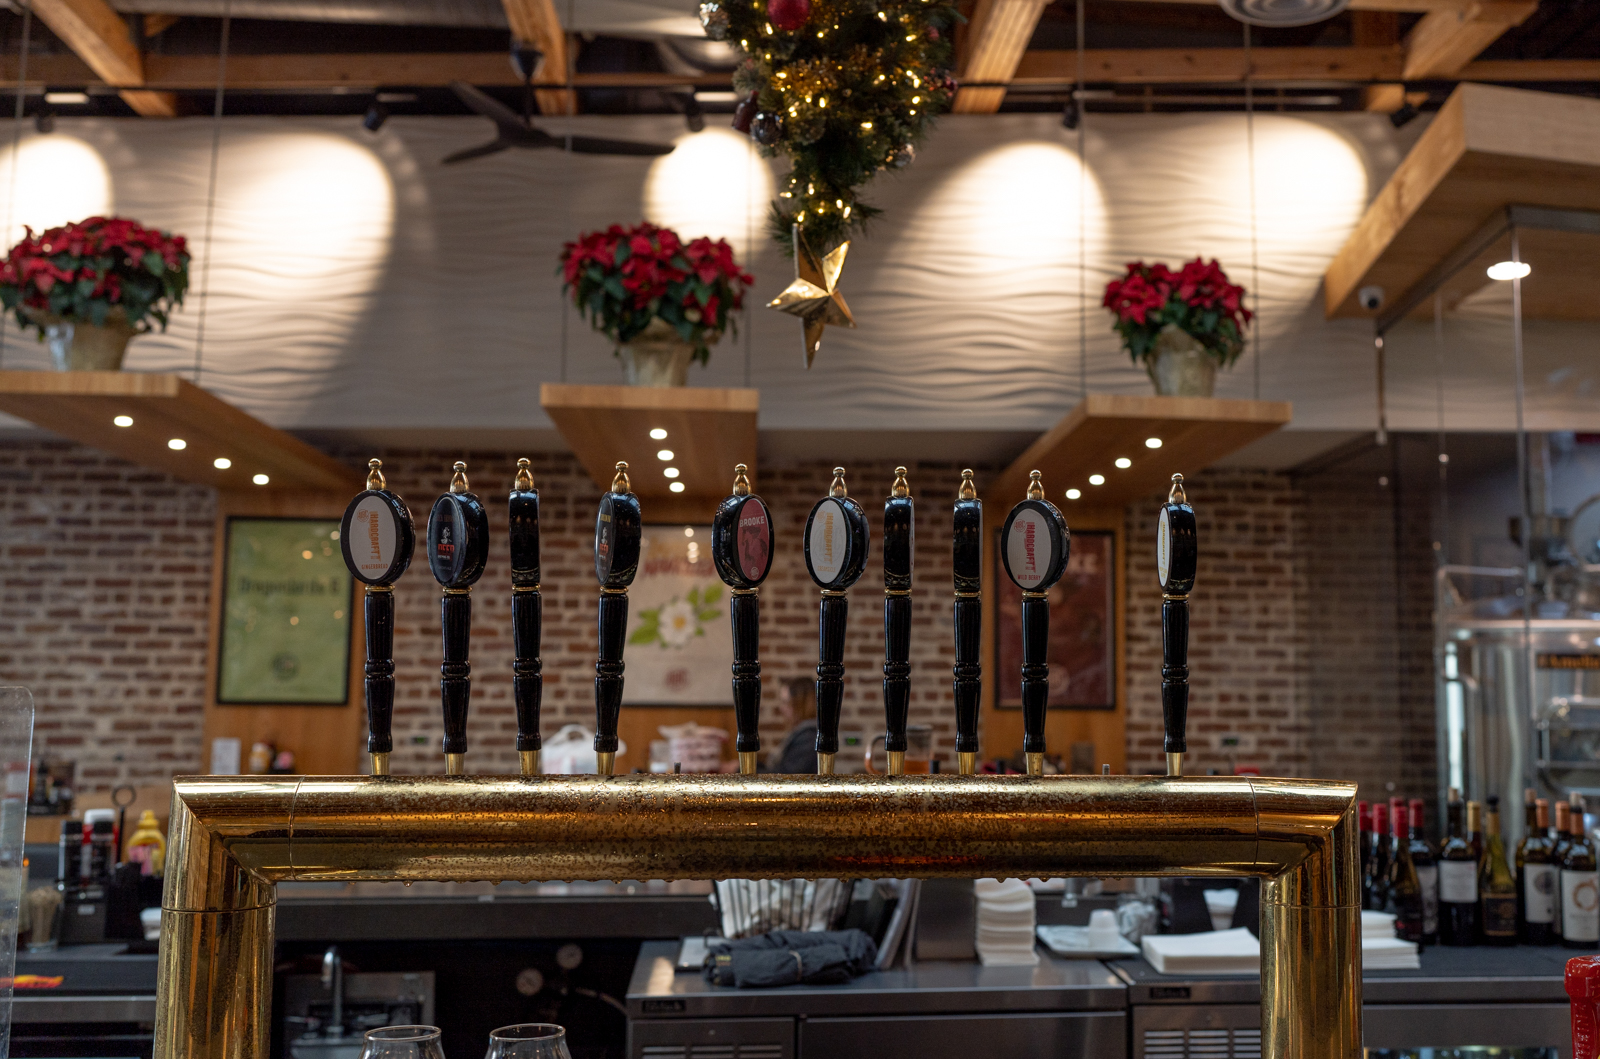 The inside of Amelia Island Brewing Company. The photo is centered on the tap handles for AIBC, which are black with gold trim. The background is blurred out and is brick and has a few poinsettas hanging from wooden planks that host round lights.